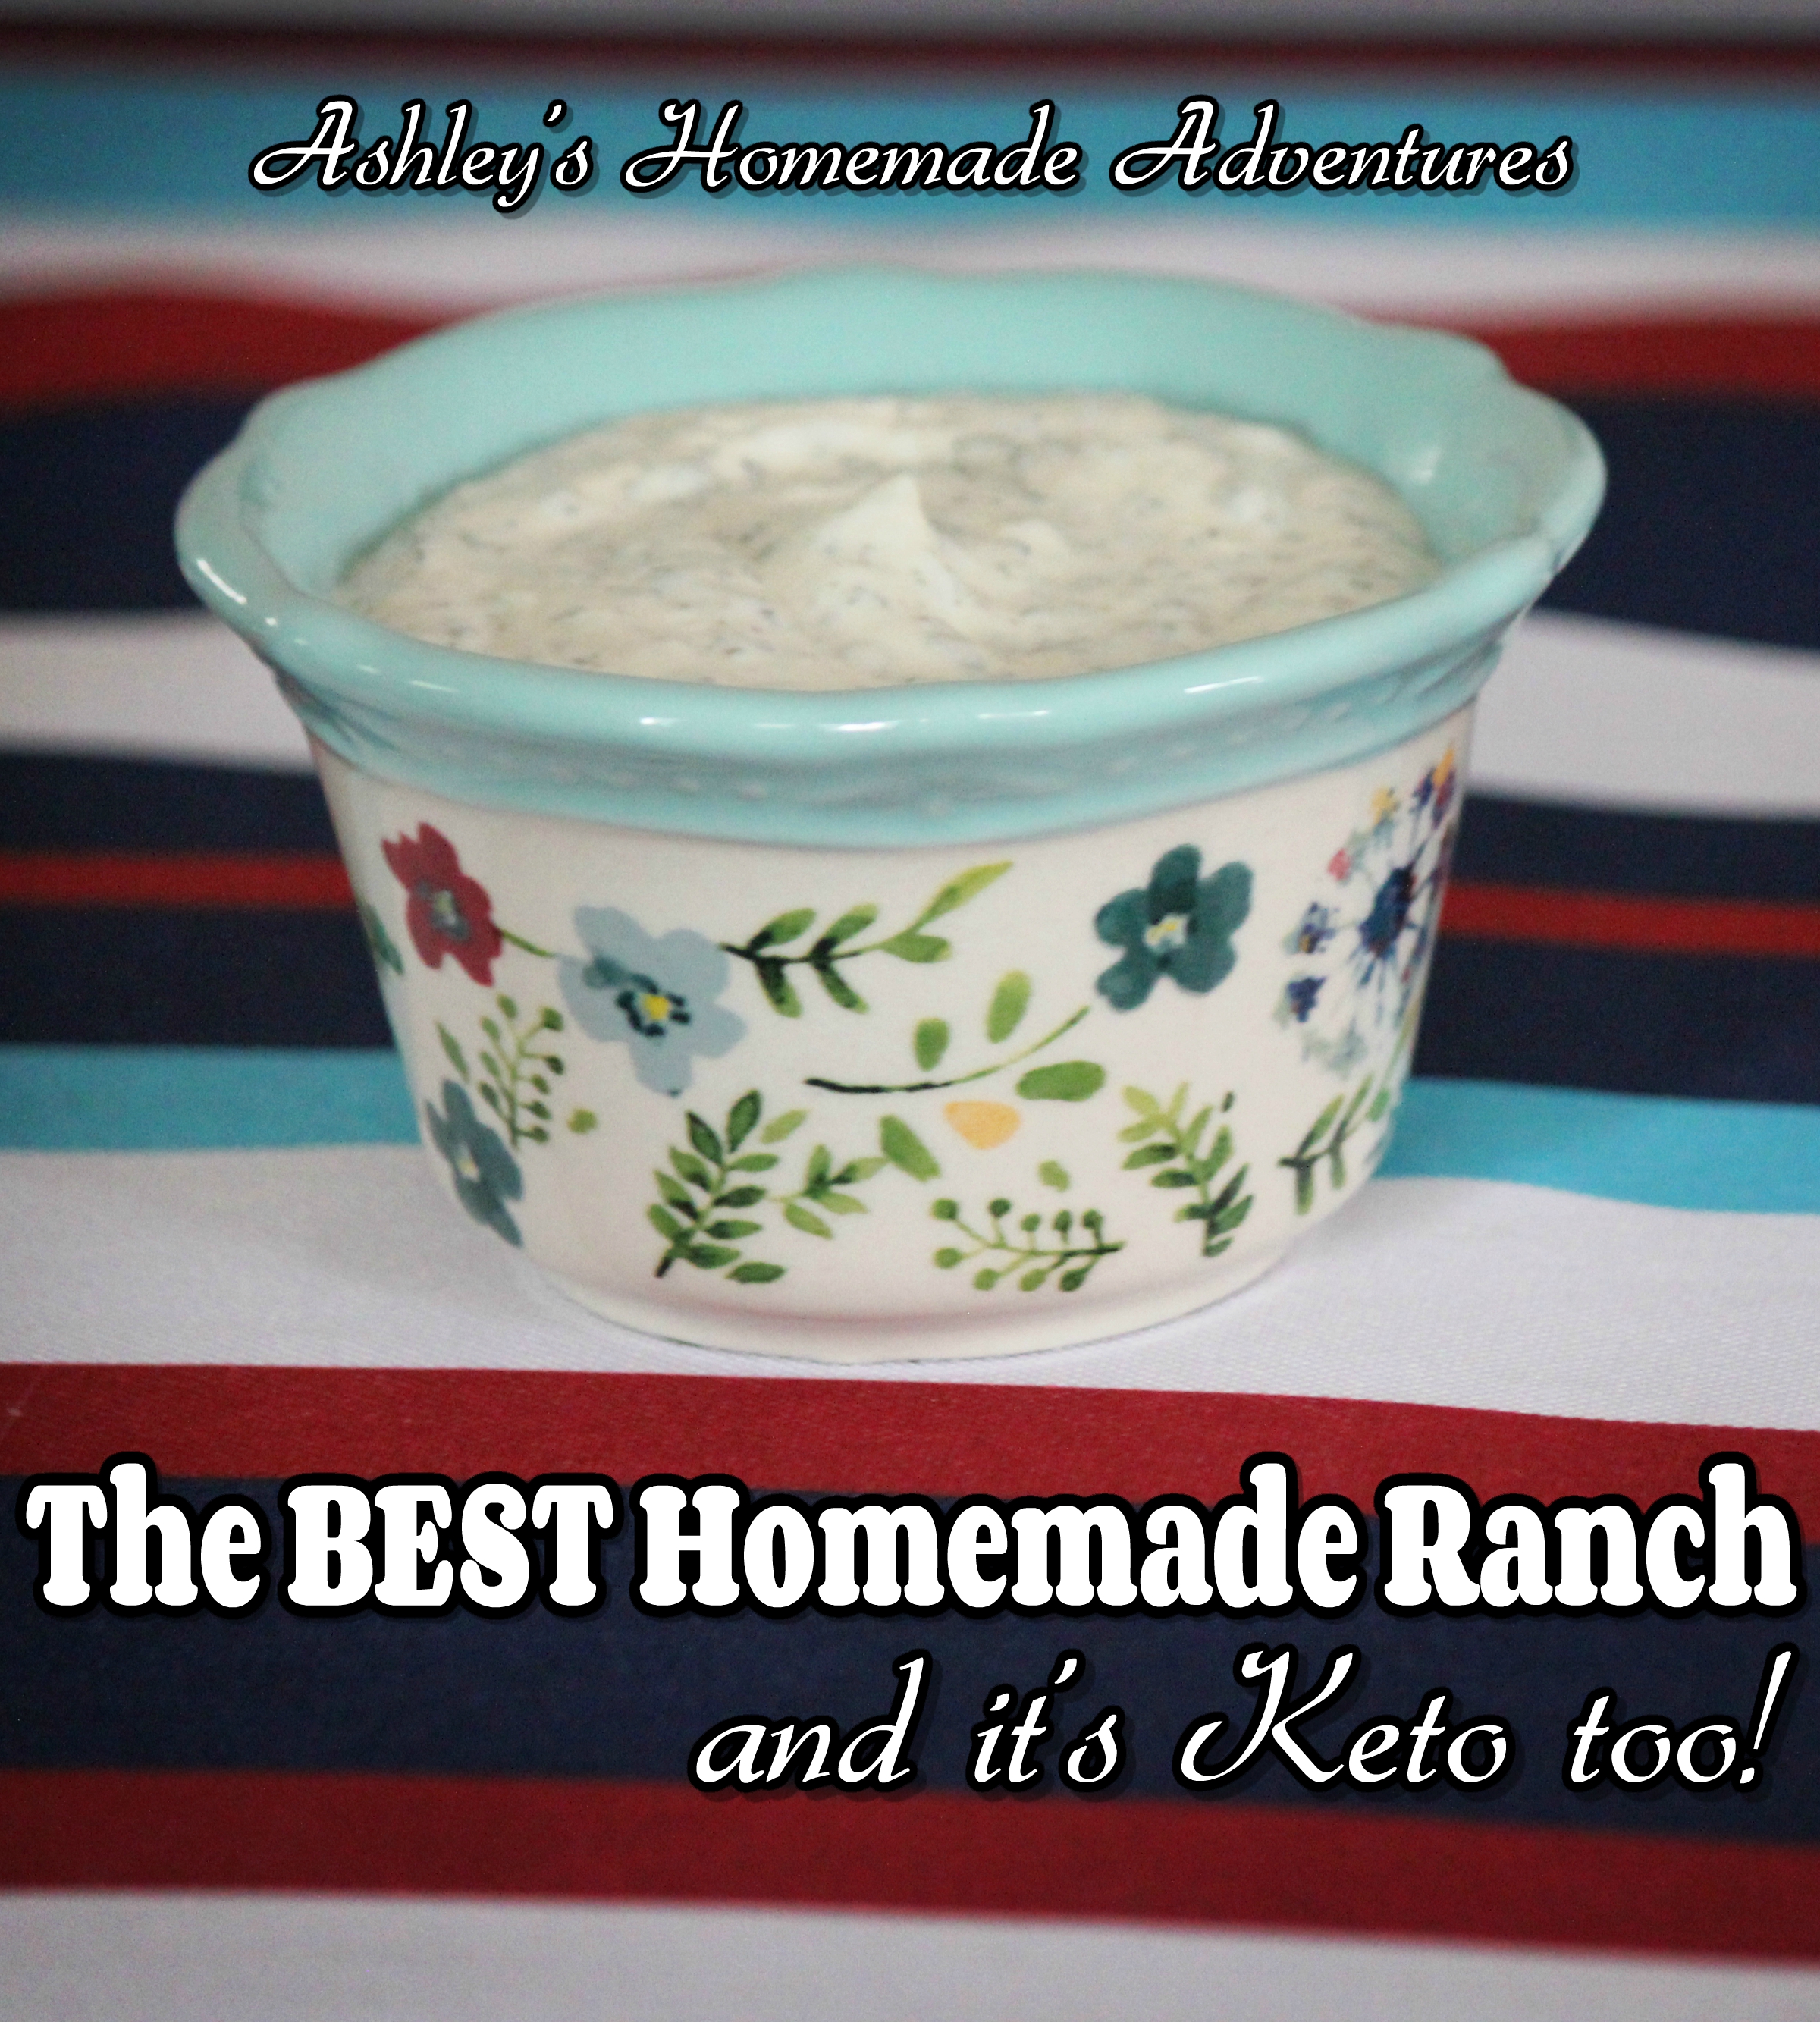 The Best Homemade Ranch ~ Ashley's Homemade Adventures
